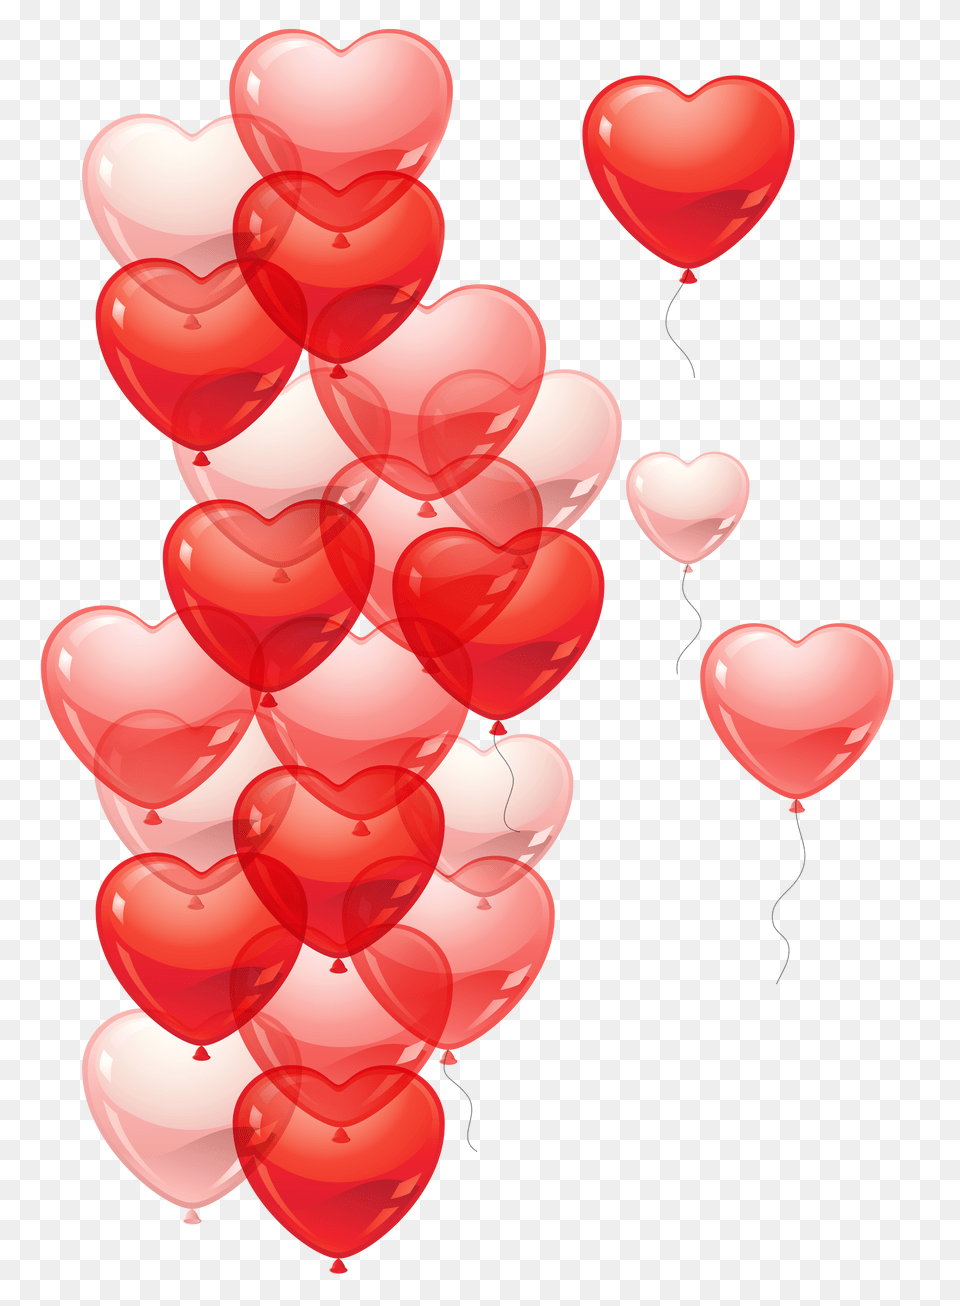 Download Hd Freeuse Stock Heart Bubbles Clipart Transparent Heart Shaped Balloons, Balloon, Food, Fruit, Plant Png Image